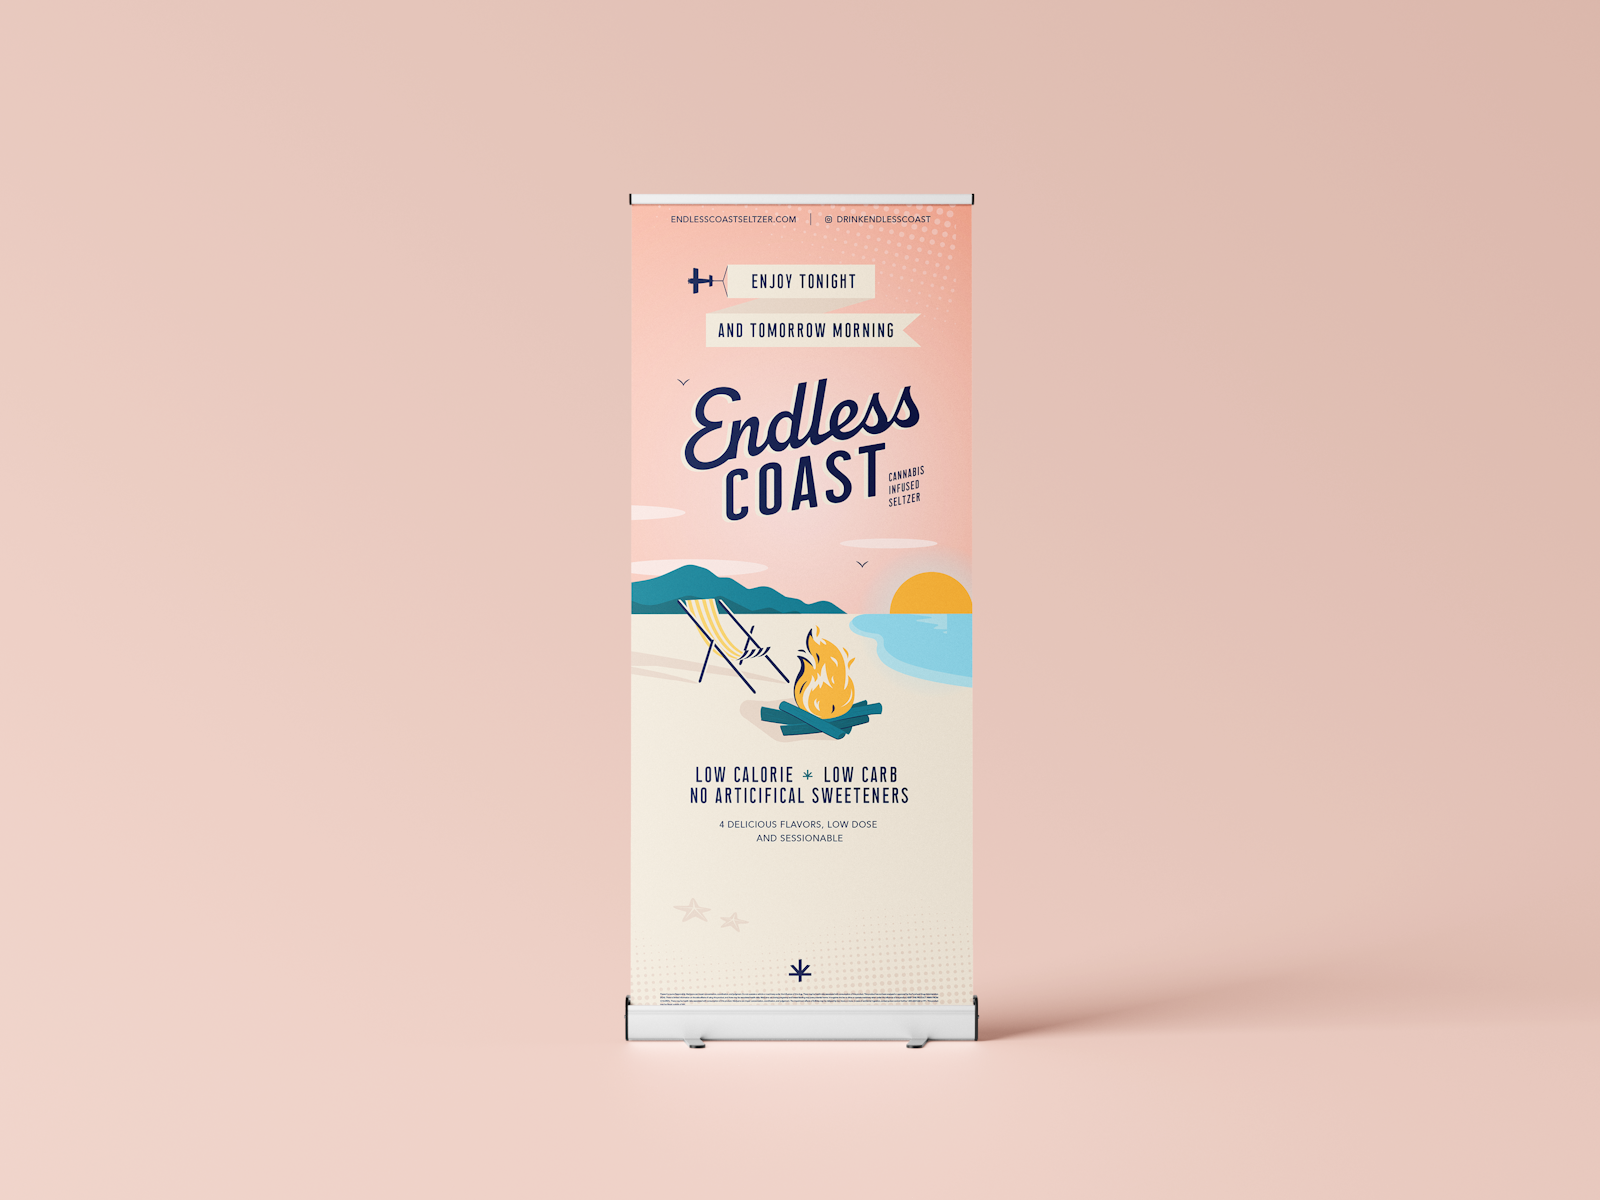 The Endless Coast brand campaign design banner for retail display on peach background.